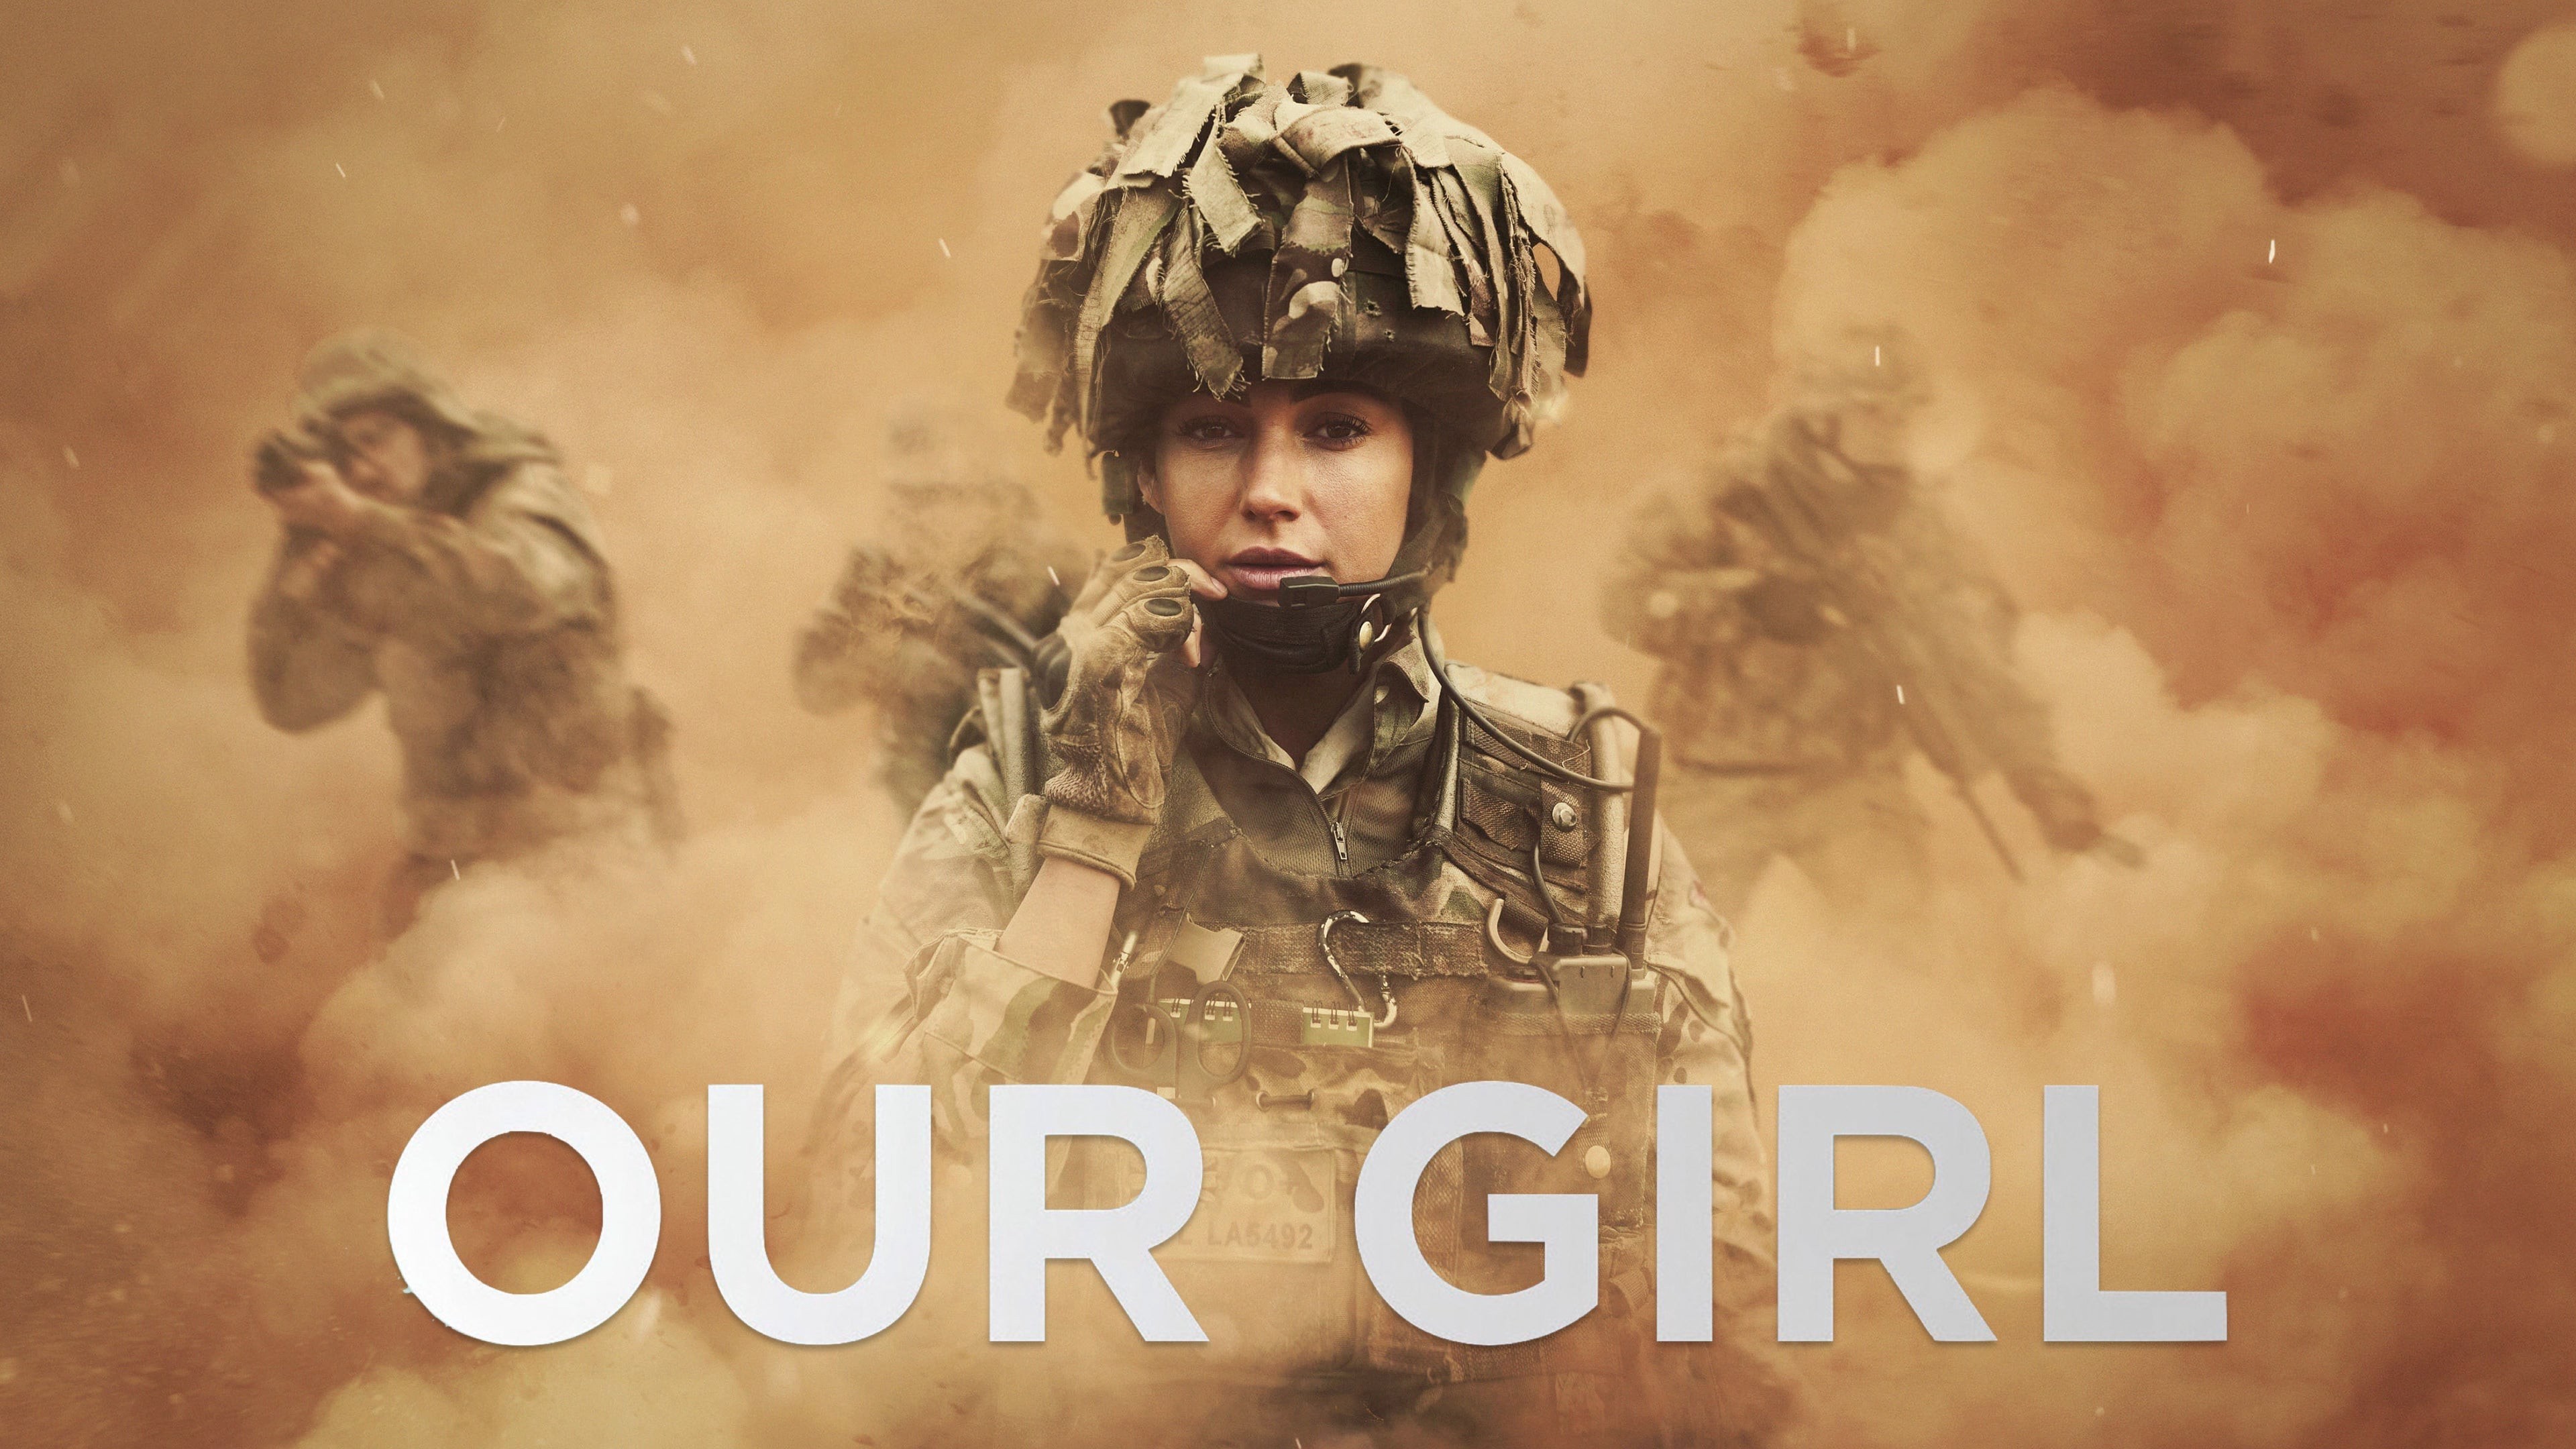 Wallpapers TV shows Our Girl movies on the desktop